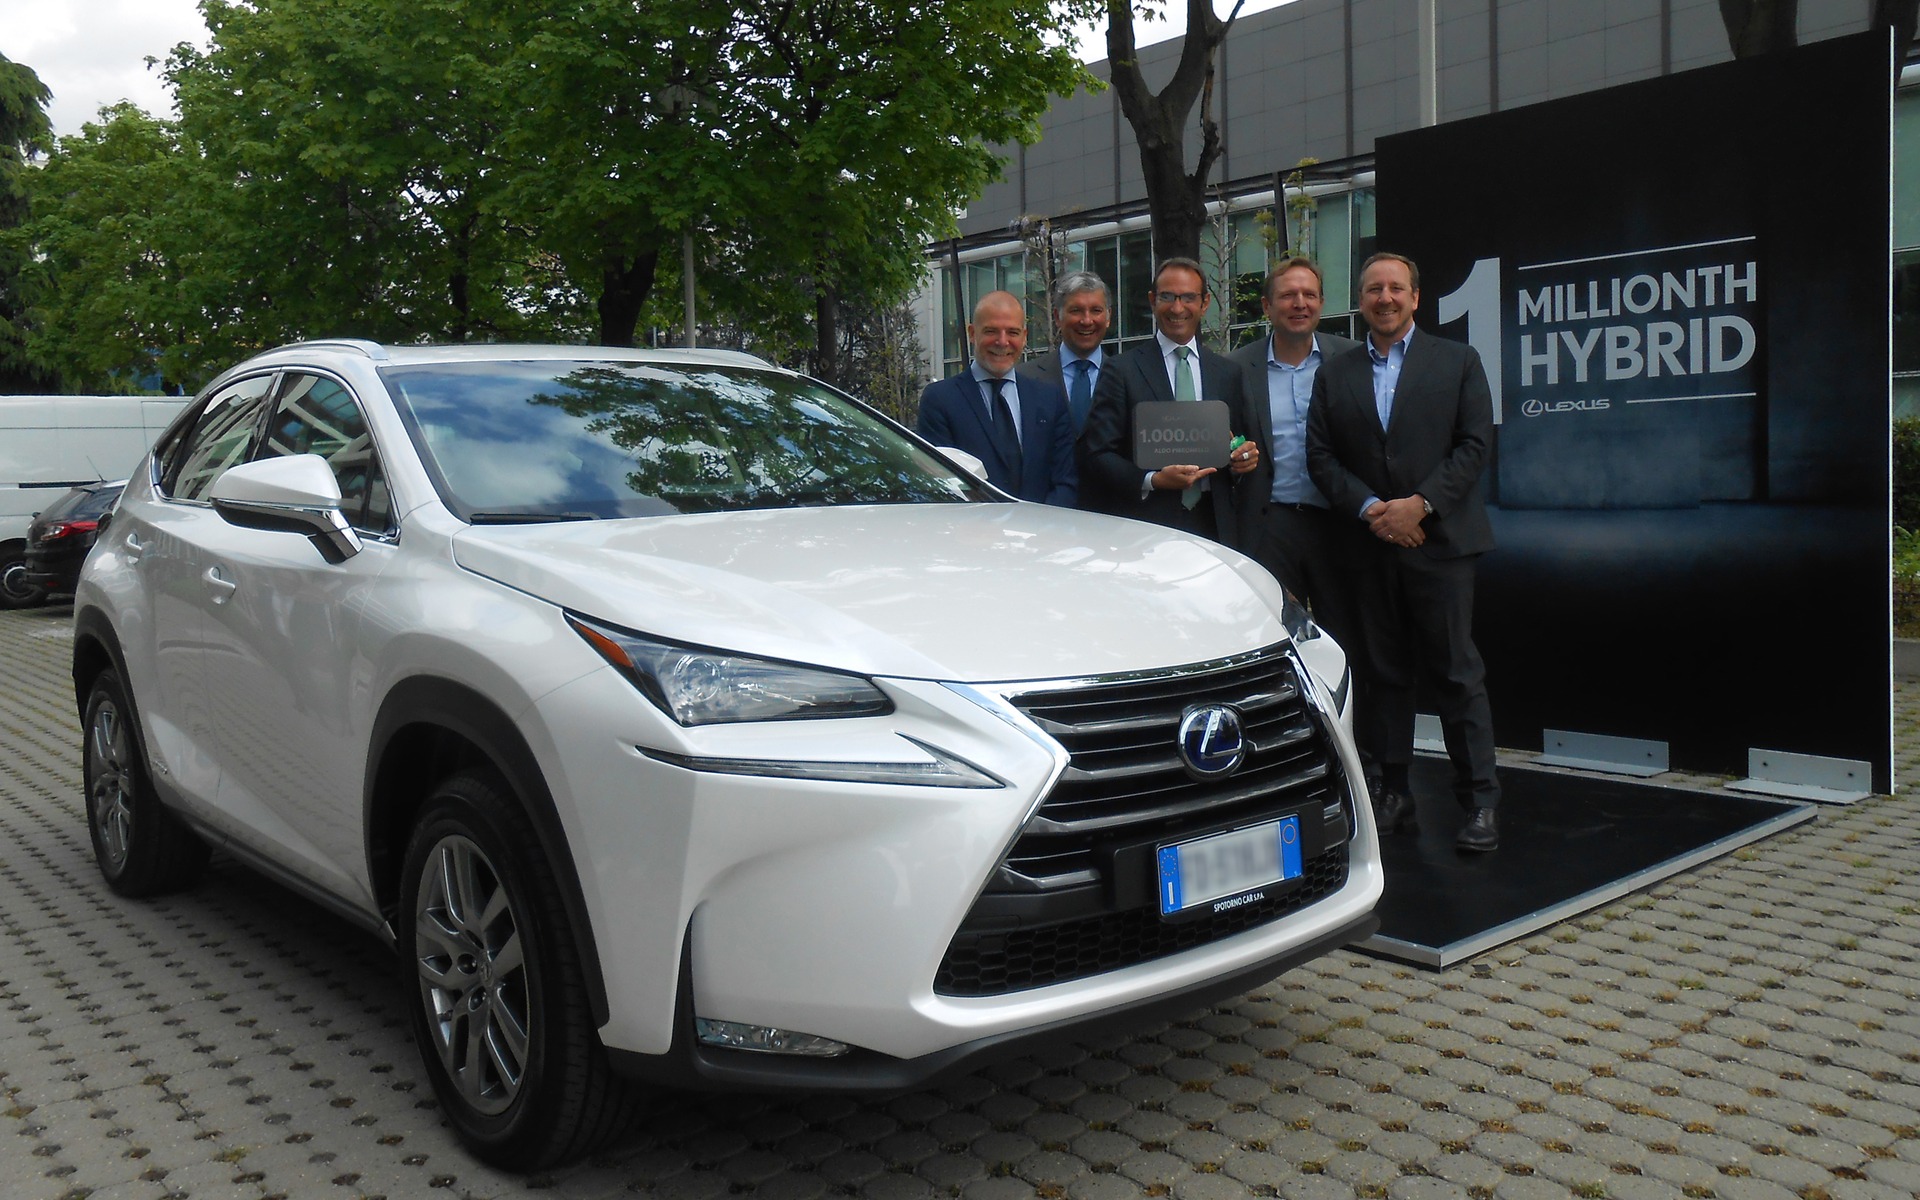 The one-millionth Lexus hybrid vehicle sold, in Milan, Italy.